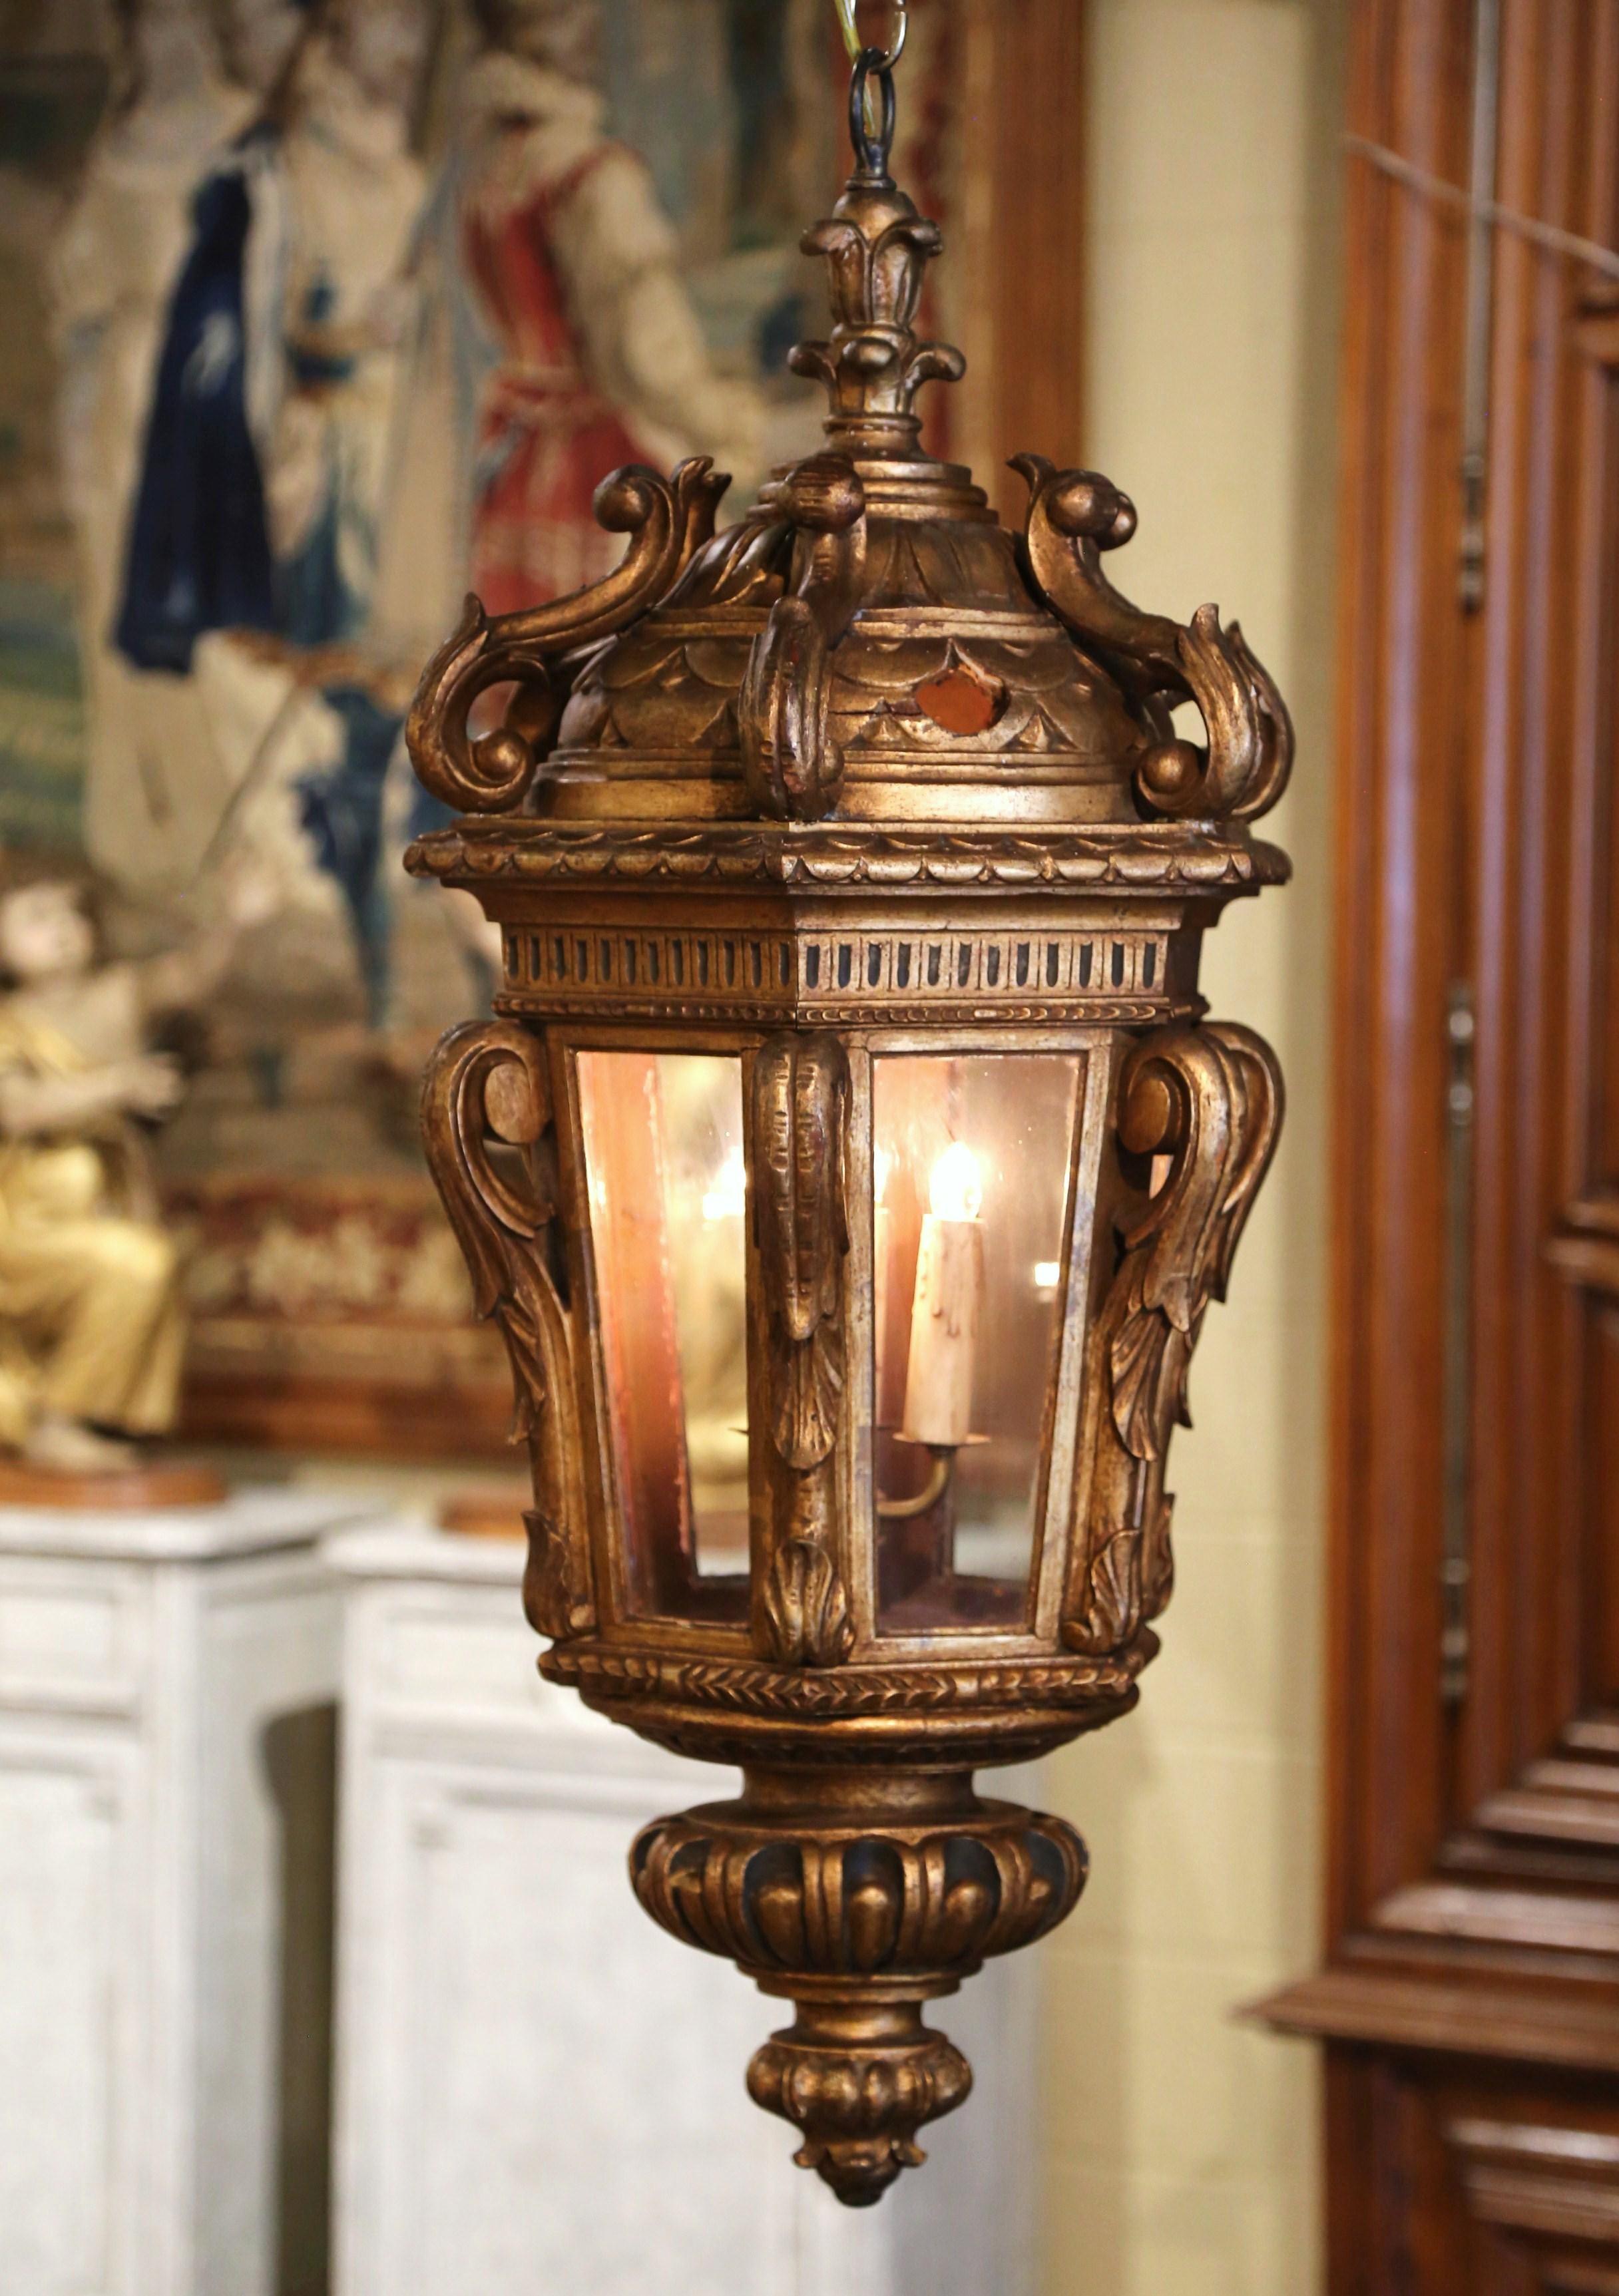 Bring Classic, French elegance into your home with this large rococo hand carved hall lantern. Crafted in France, circa 1860, this traditional hexagonal light fixture is a true showstopper. The wooden lantern with dome top and scroll decor, has